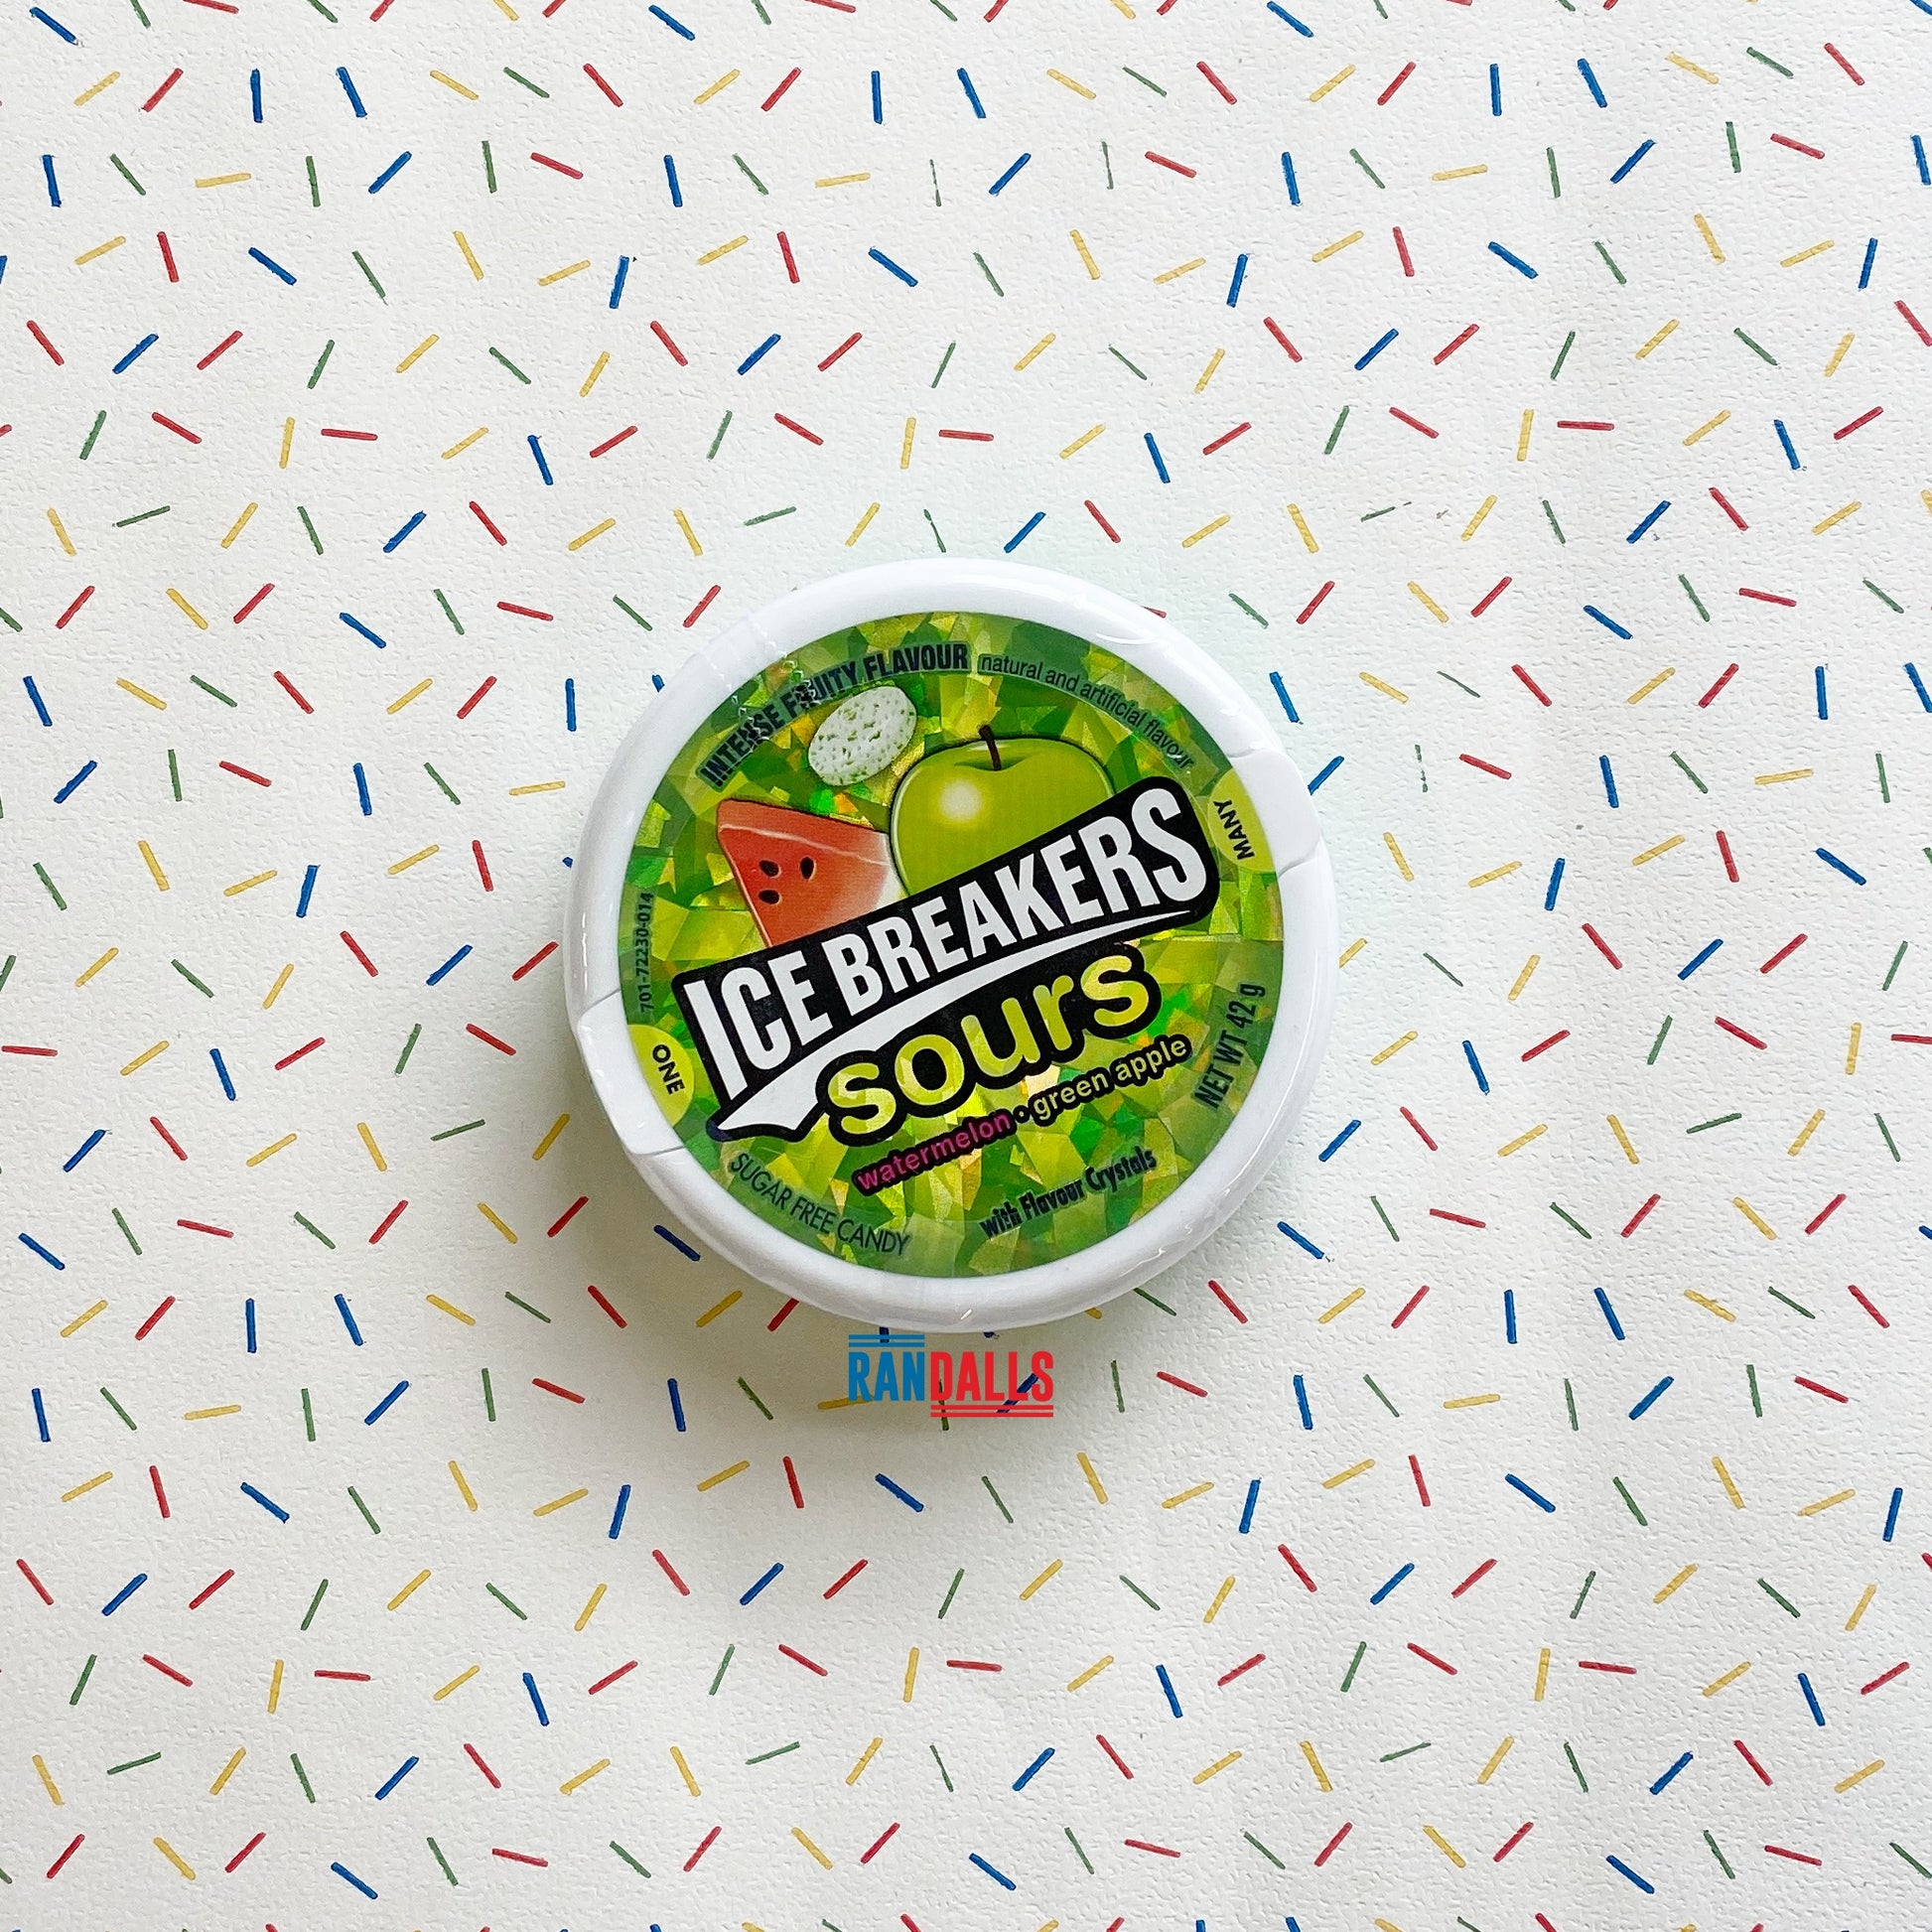 ice breakers sours watermelon, green apple, mint, candy, sweets, usa, randalls